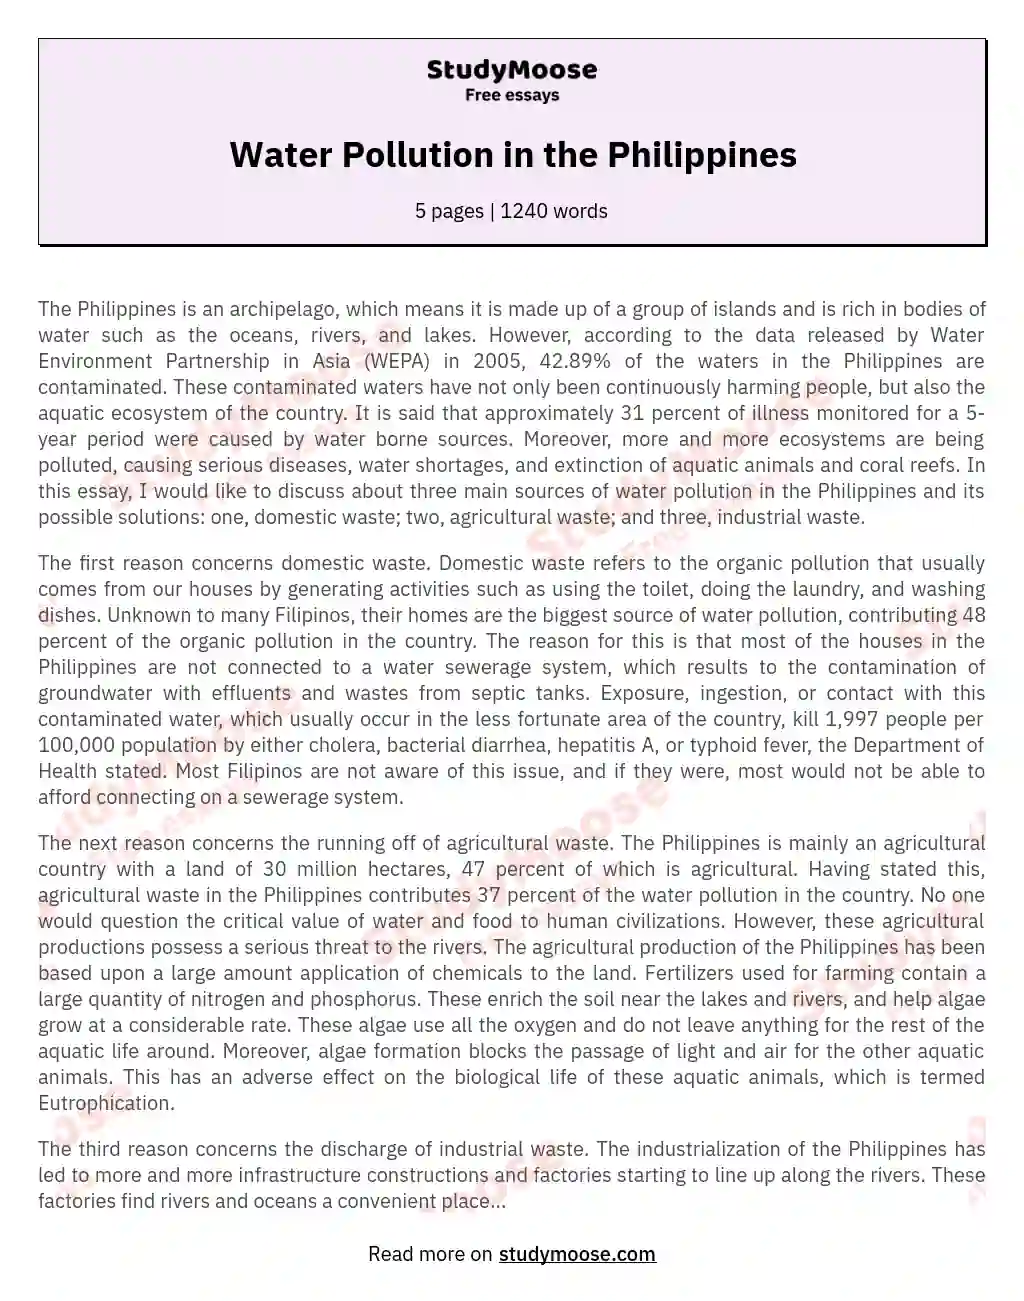 Water Pollution in the Philippines essay